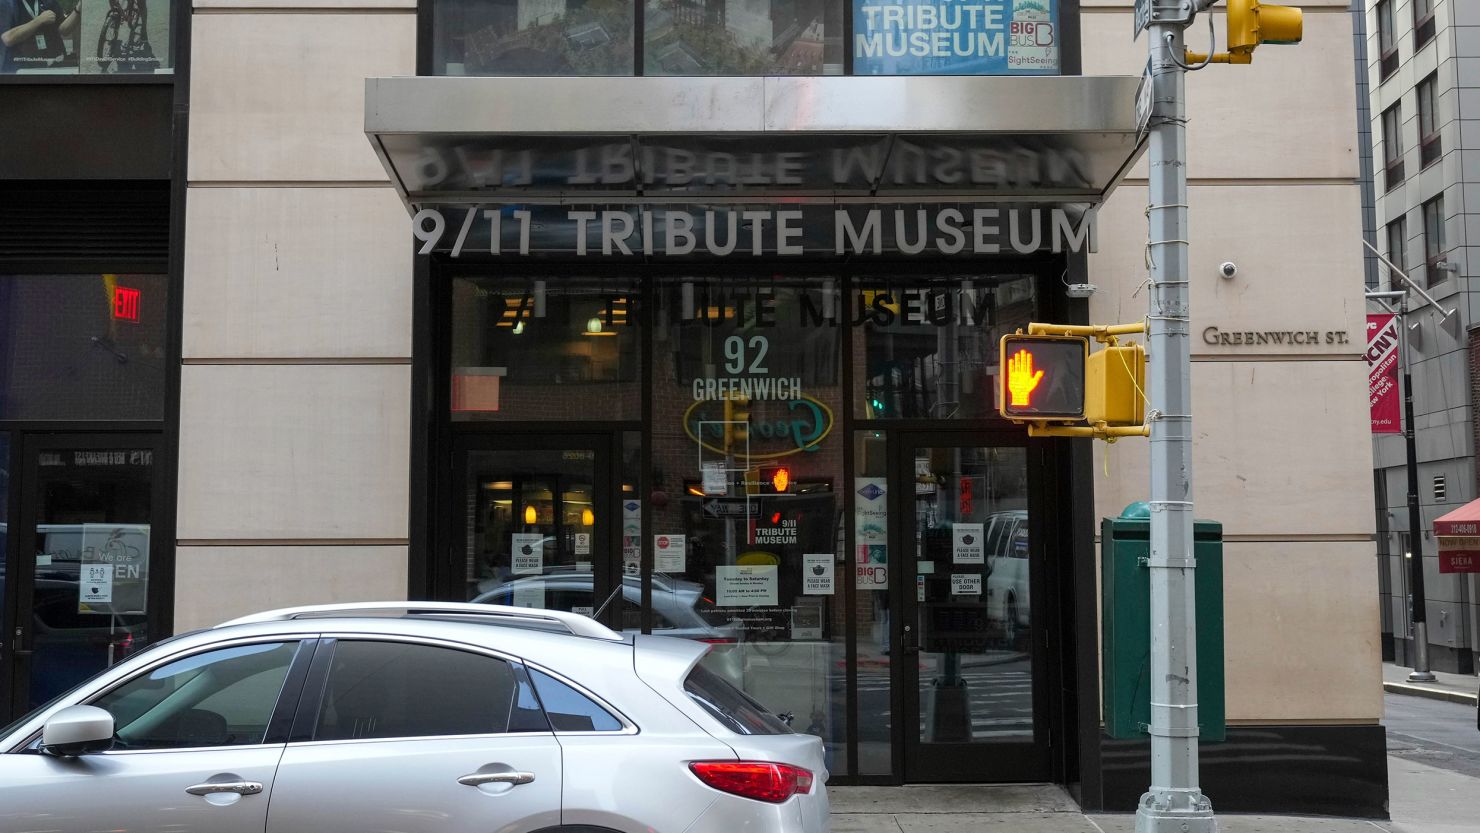 A view of 9/11 Tribute Museum on March 18, 2022. The museum saw a sharp decline in visitors and revenue since the start of the pandemic.